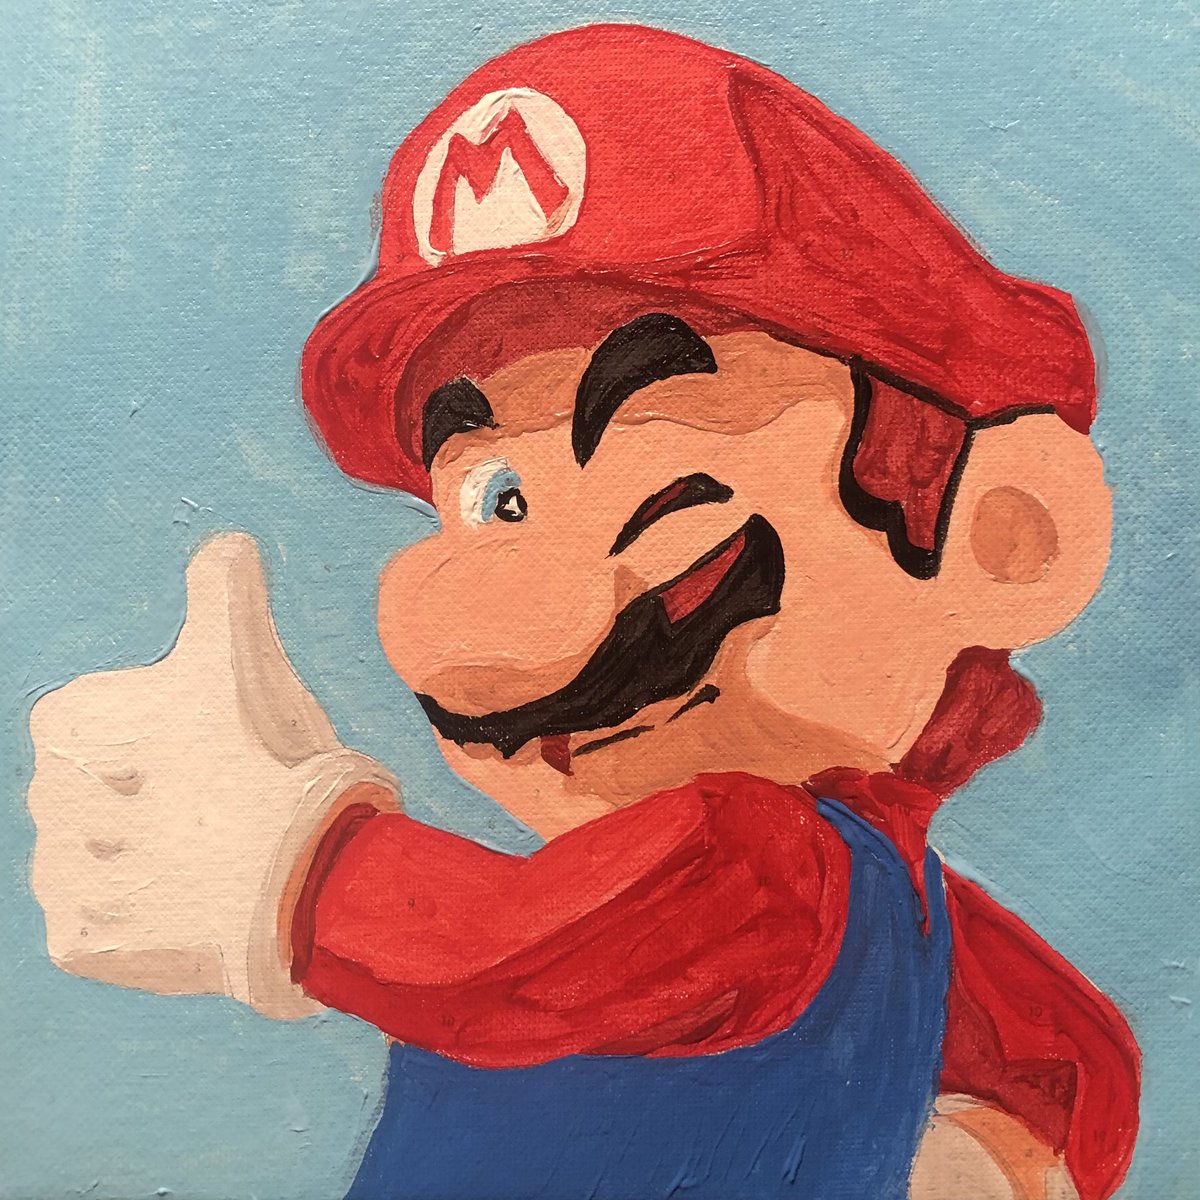 Have a great day! #paintbynumbers #mario #art